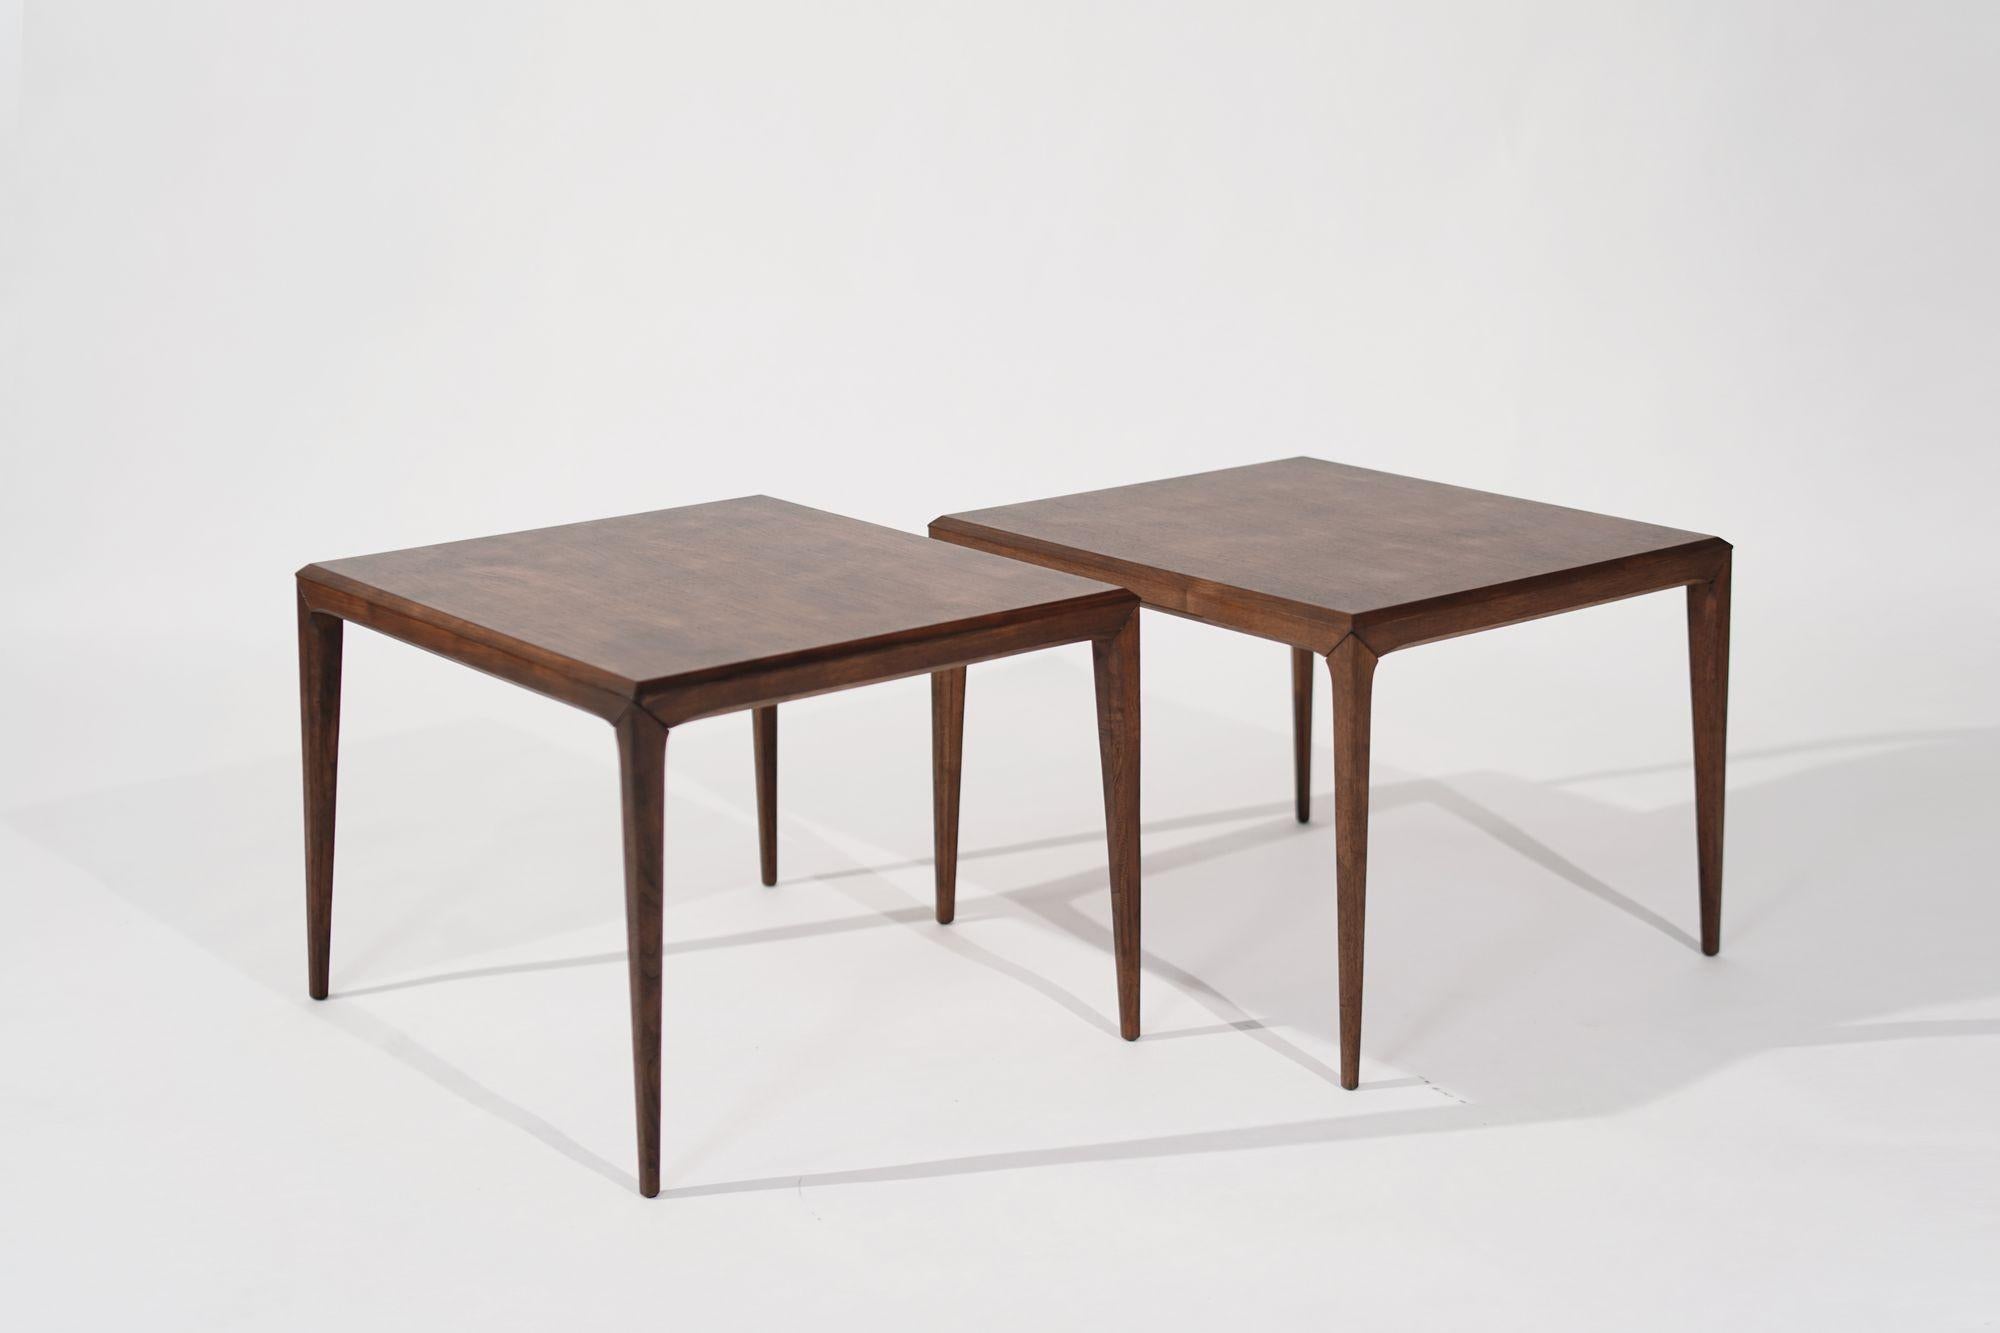 Enhance your space with this set of large-scale teak end tables by Johannes Andersen for CFC Silkeborg, Denmark, circa 1950s. Fully restored to their original elegance, these tables exhibit the timeless appeal of mid-century Danish design. With